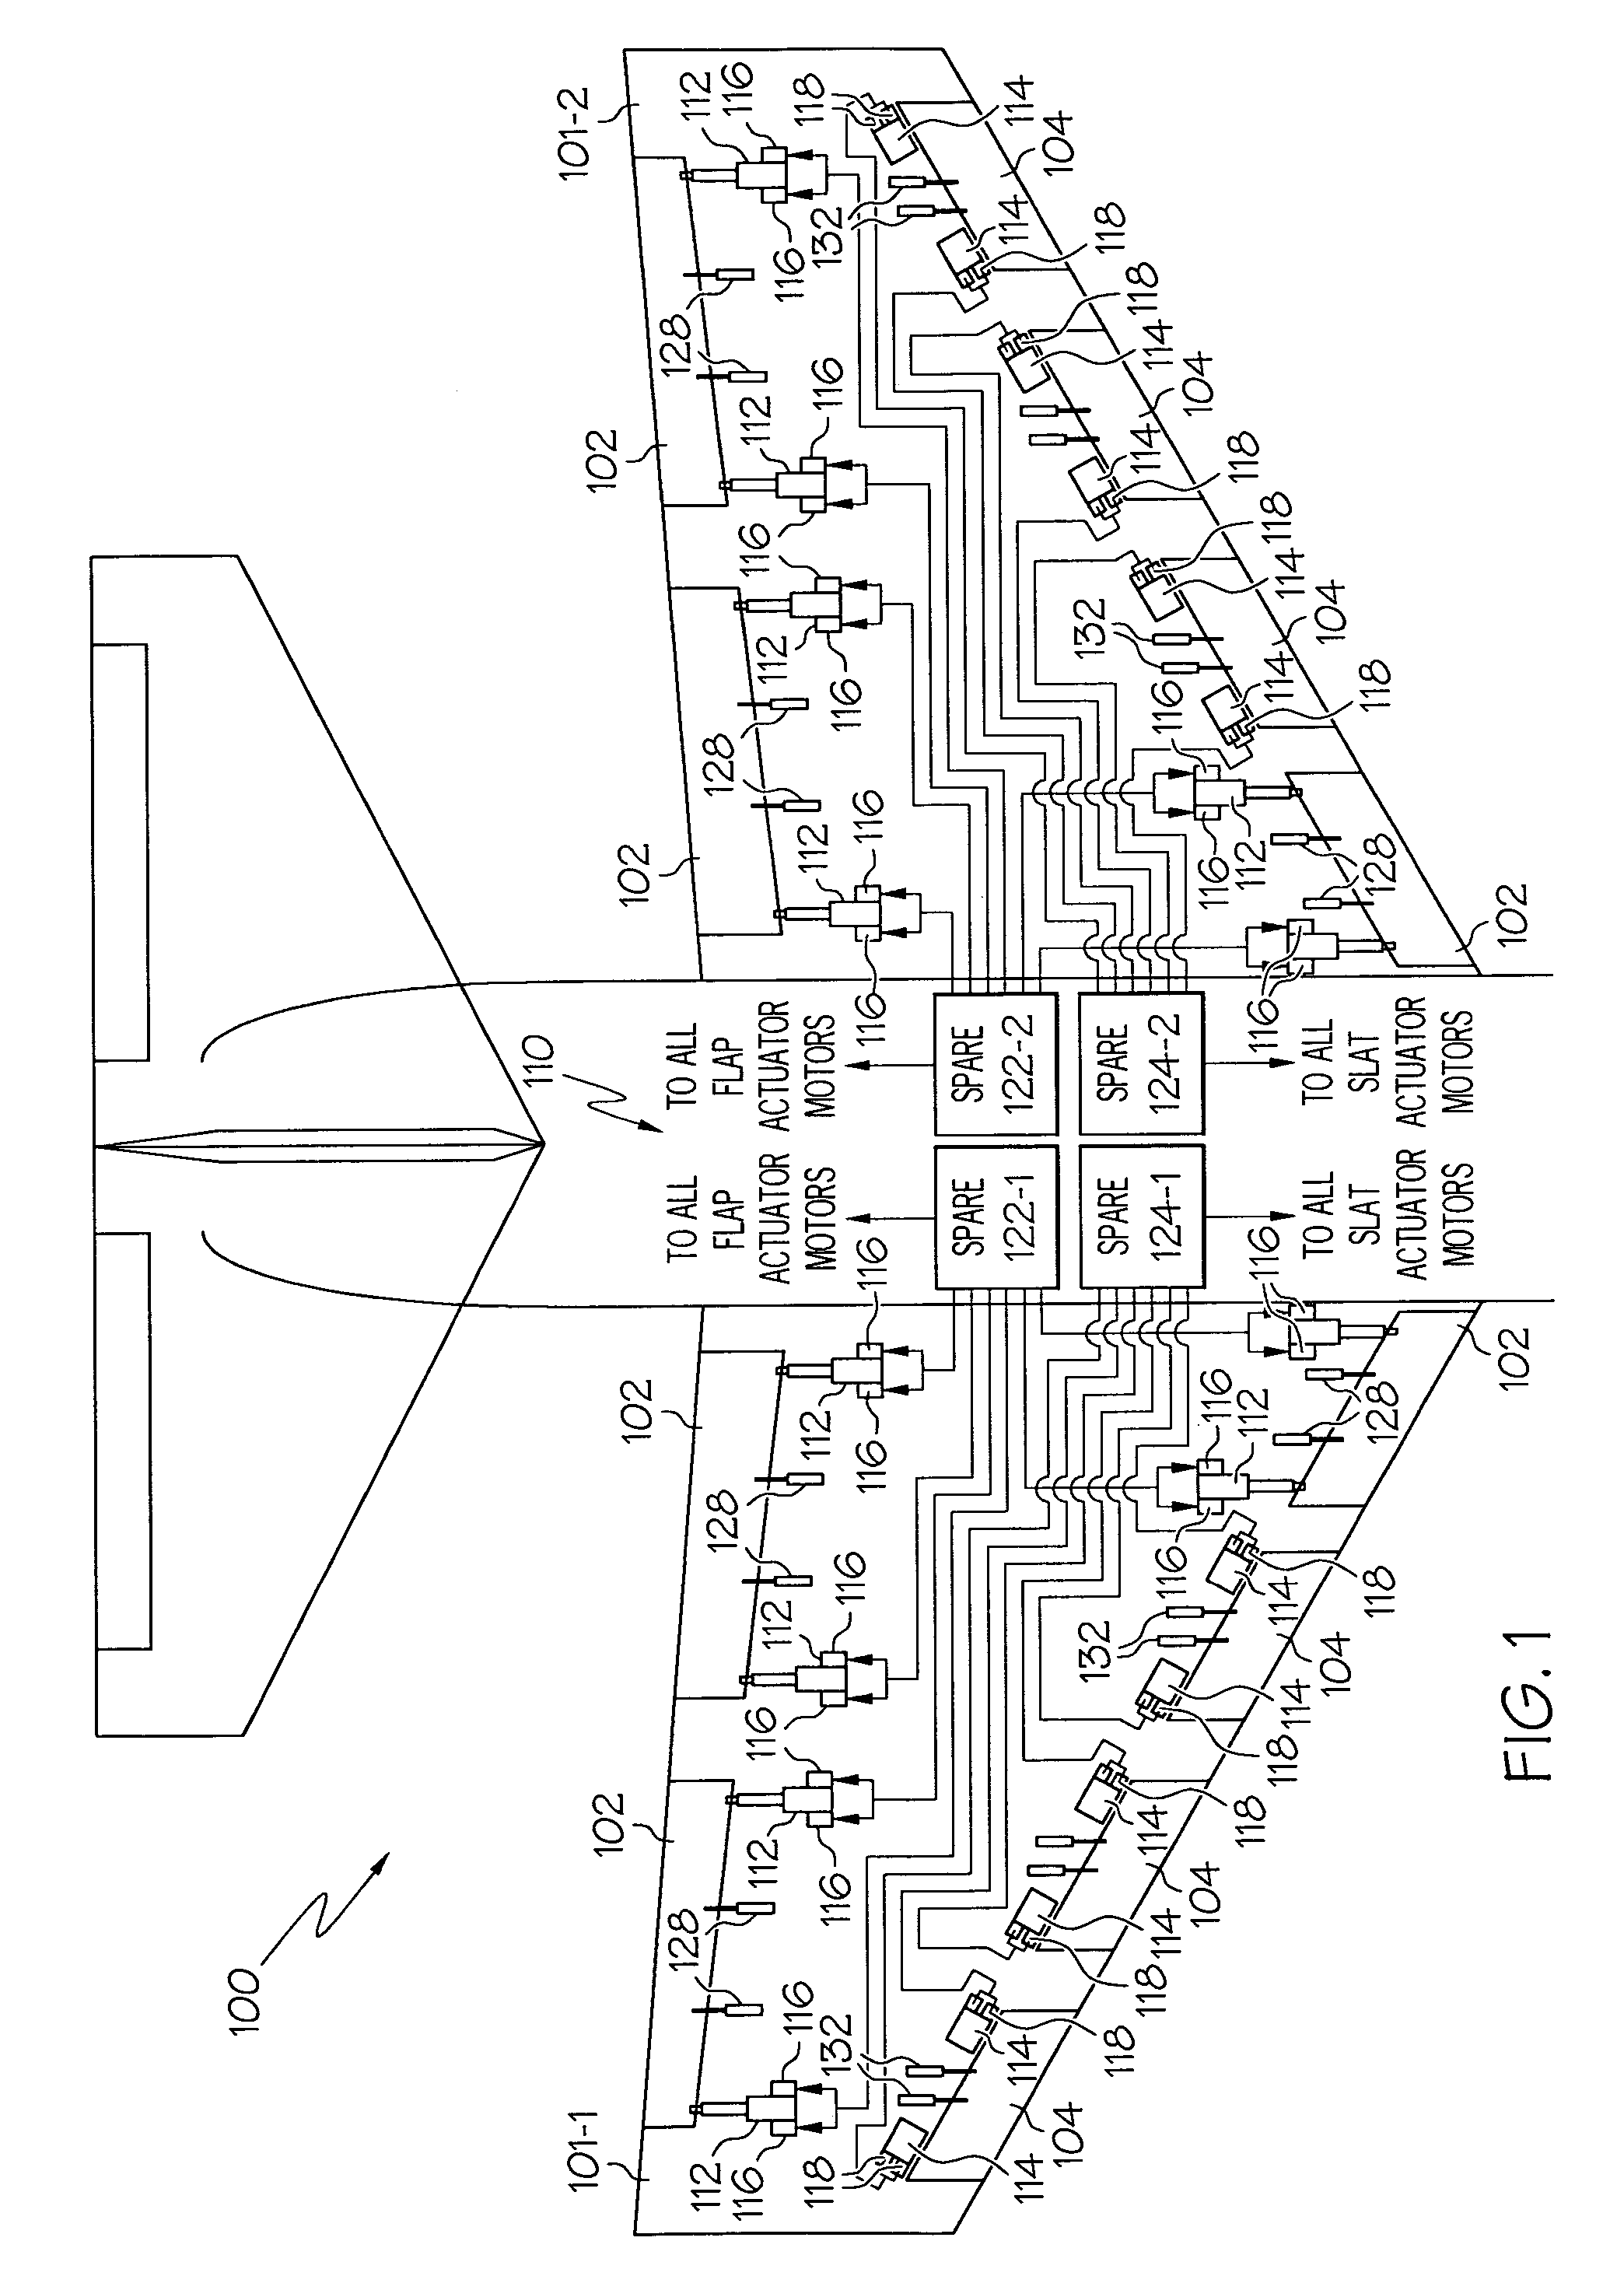 Electric flight control surface actuation system for aircraft flaps and slats